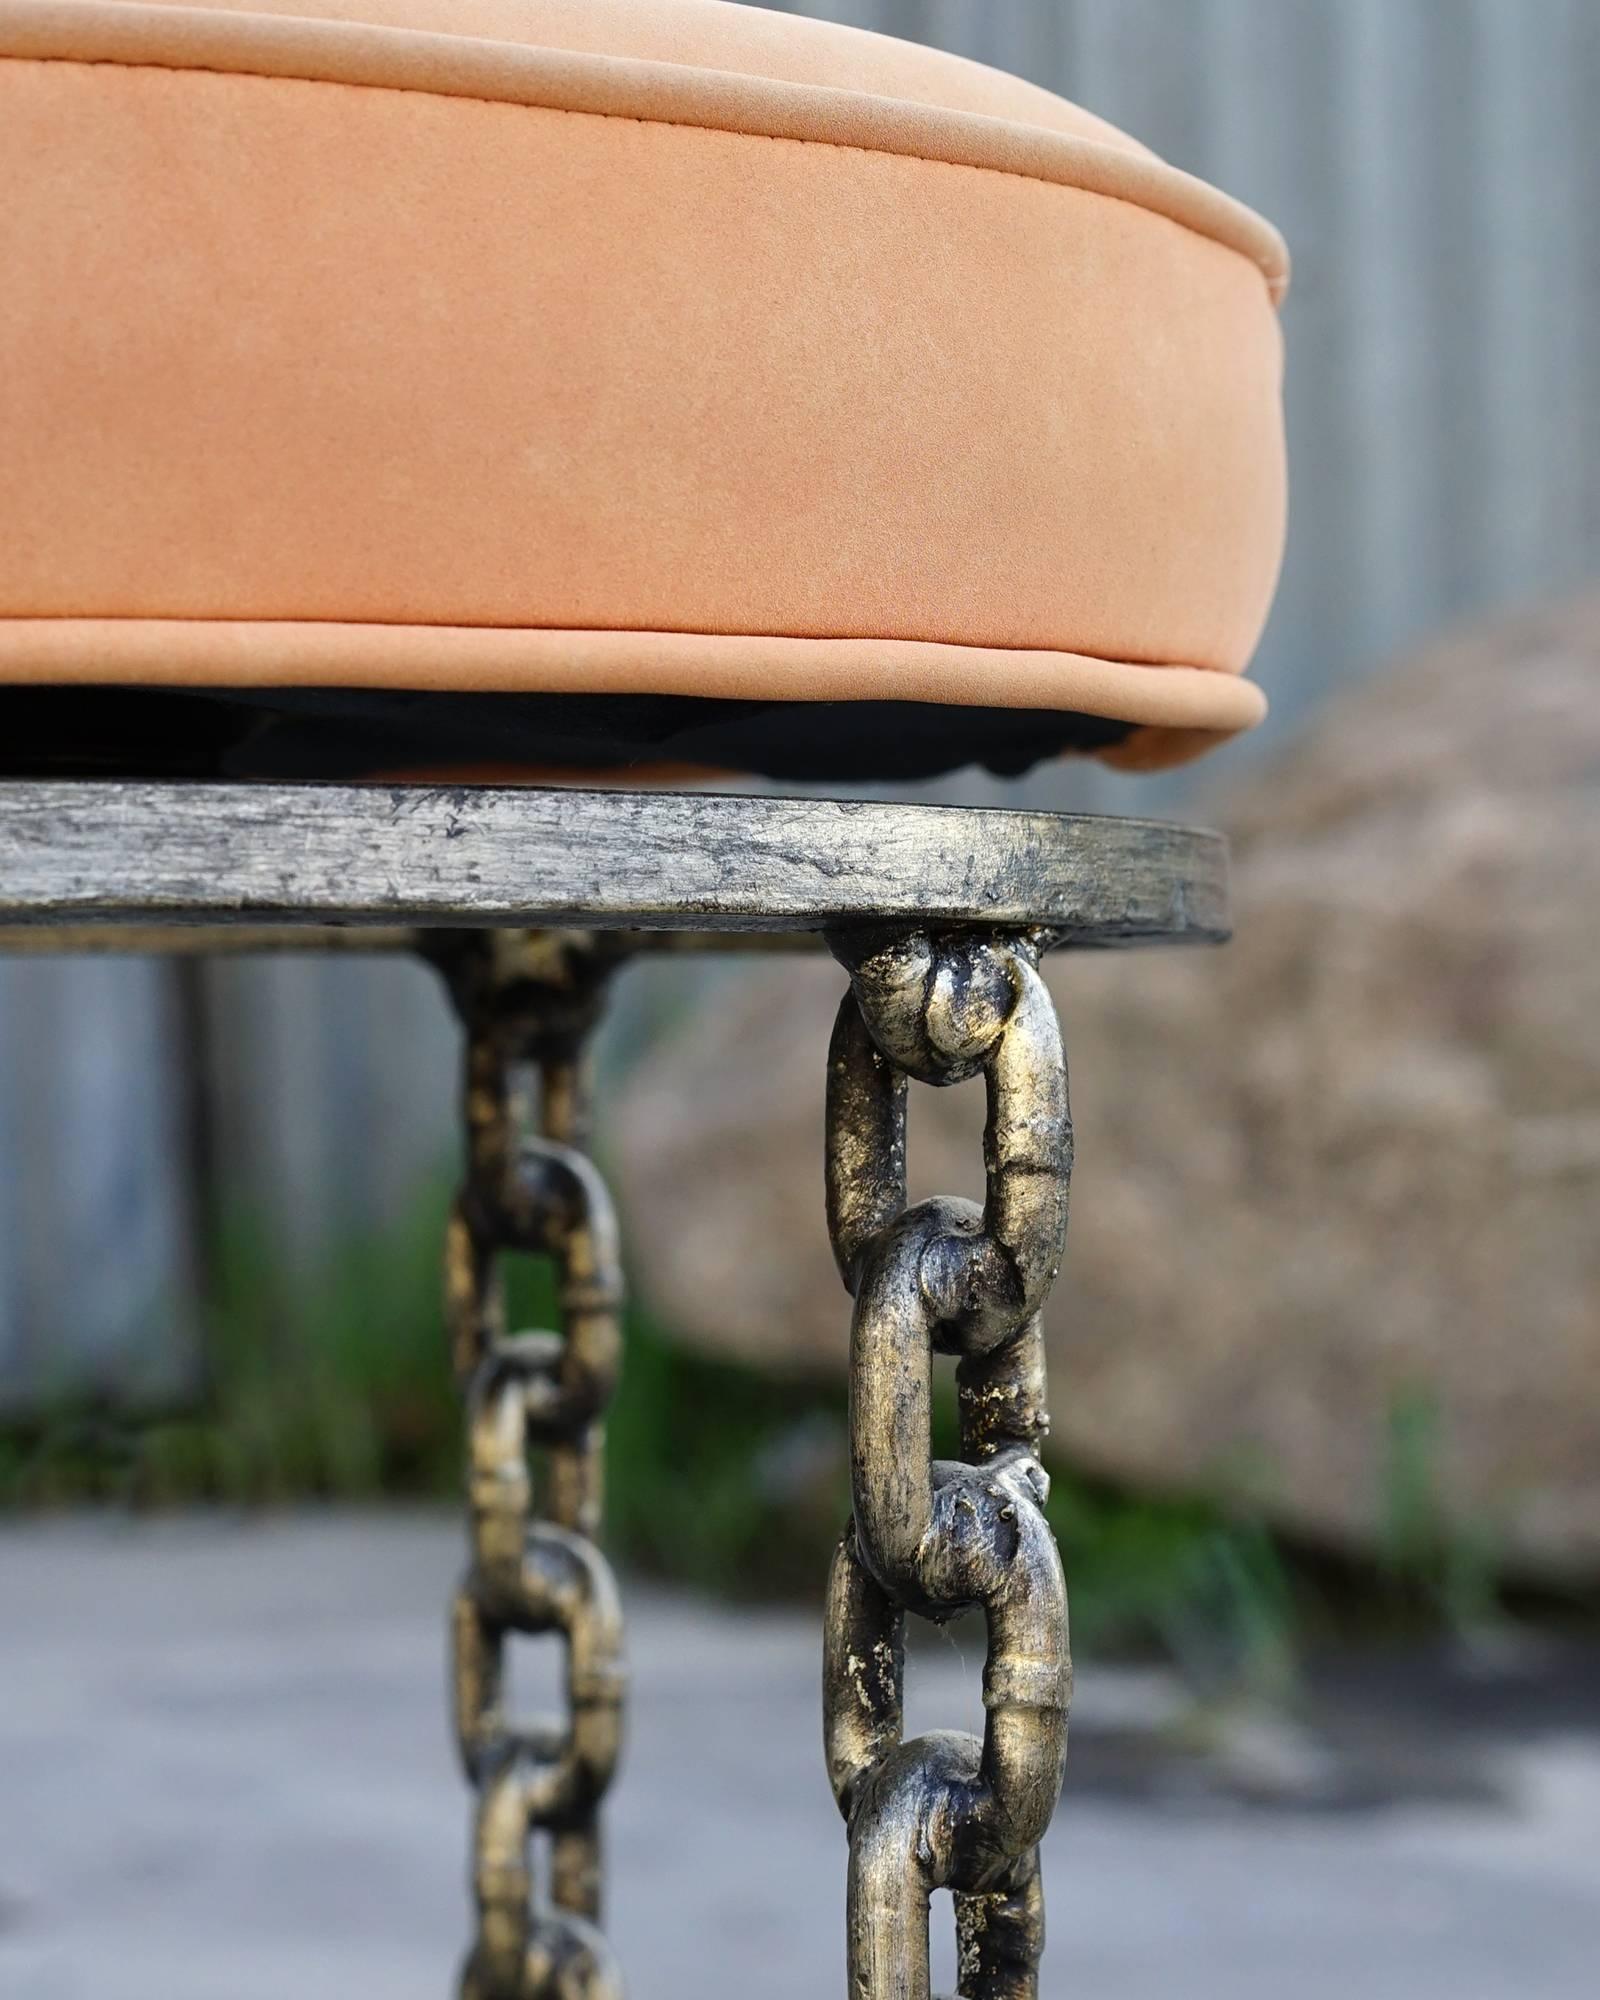 Welded chain legs ending in a graceful curve. Swivel upholstered tops with original 1980s peach microfiber fabric. Solid, sturdy, and handsome.